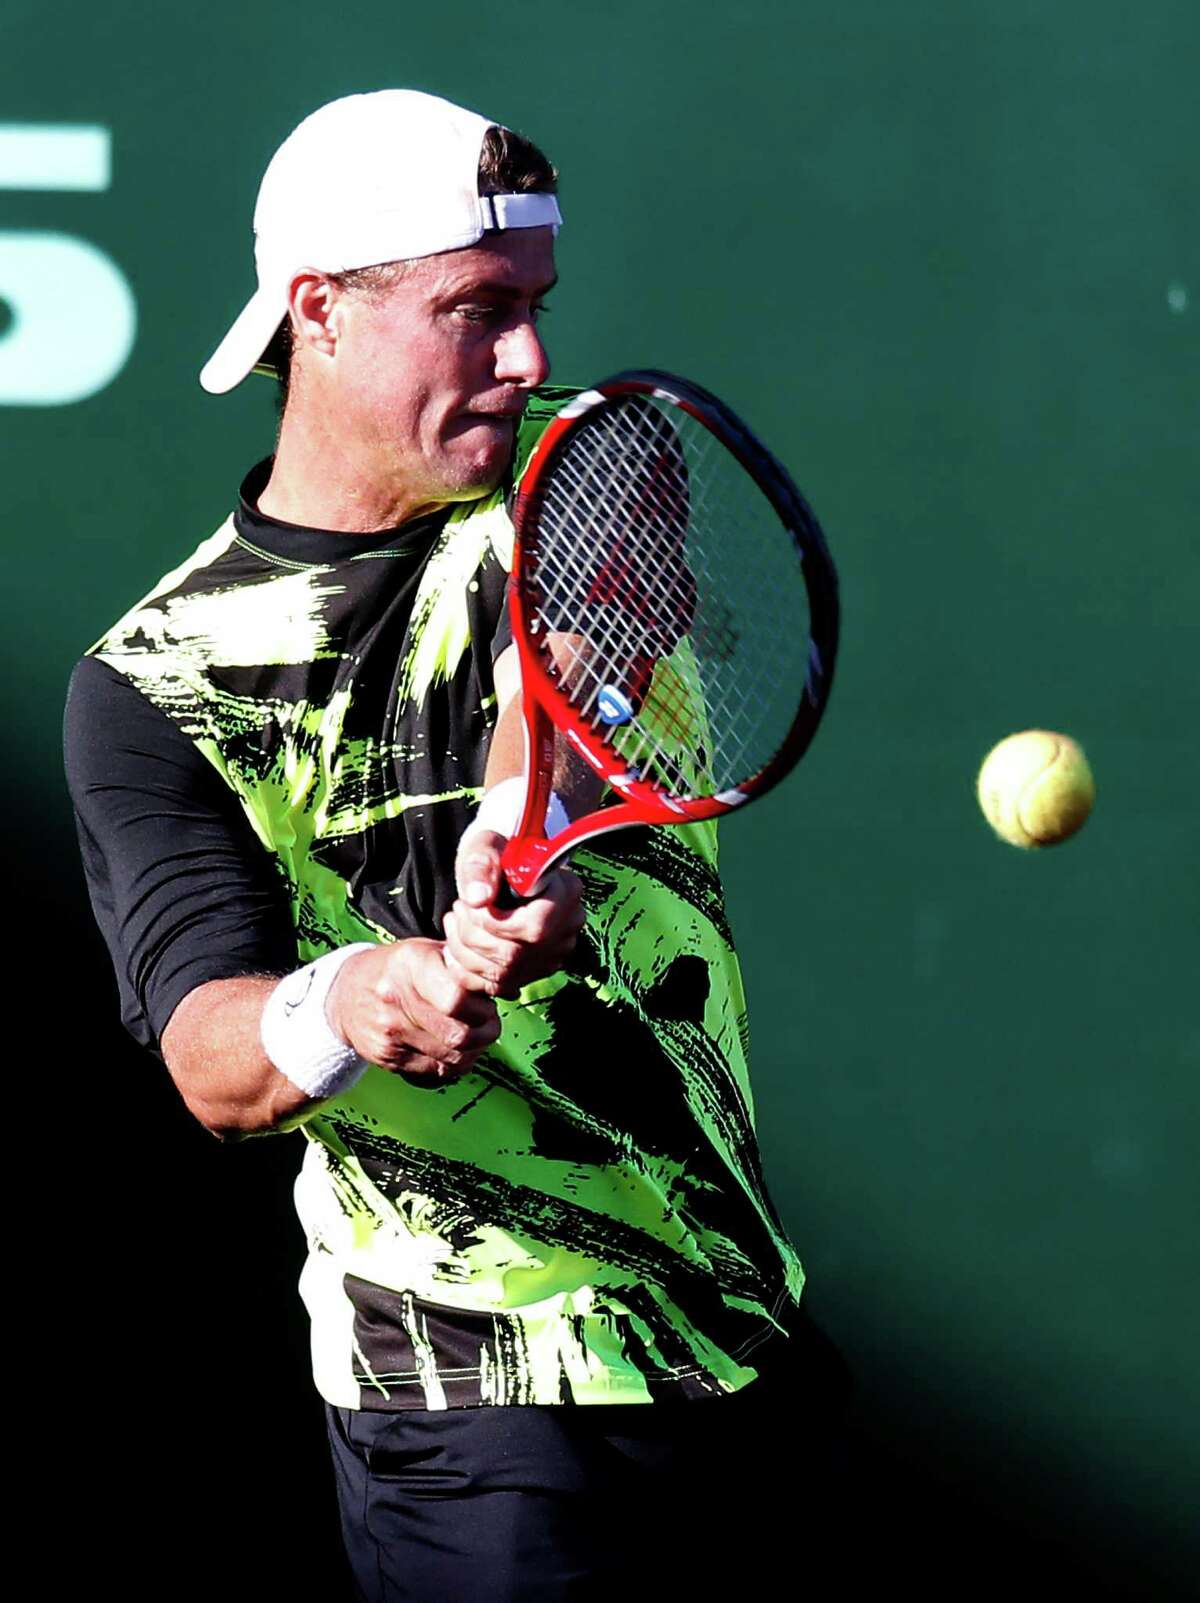 Lleyton Hewitt gets his bearings on the clay surface en route to beating Peter Polansky in a three-setter.